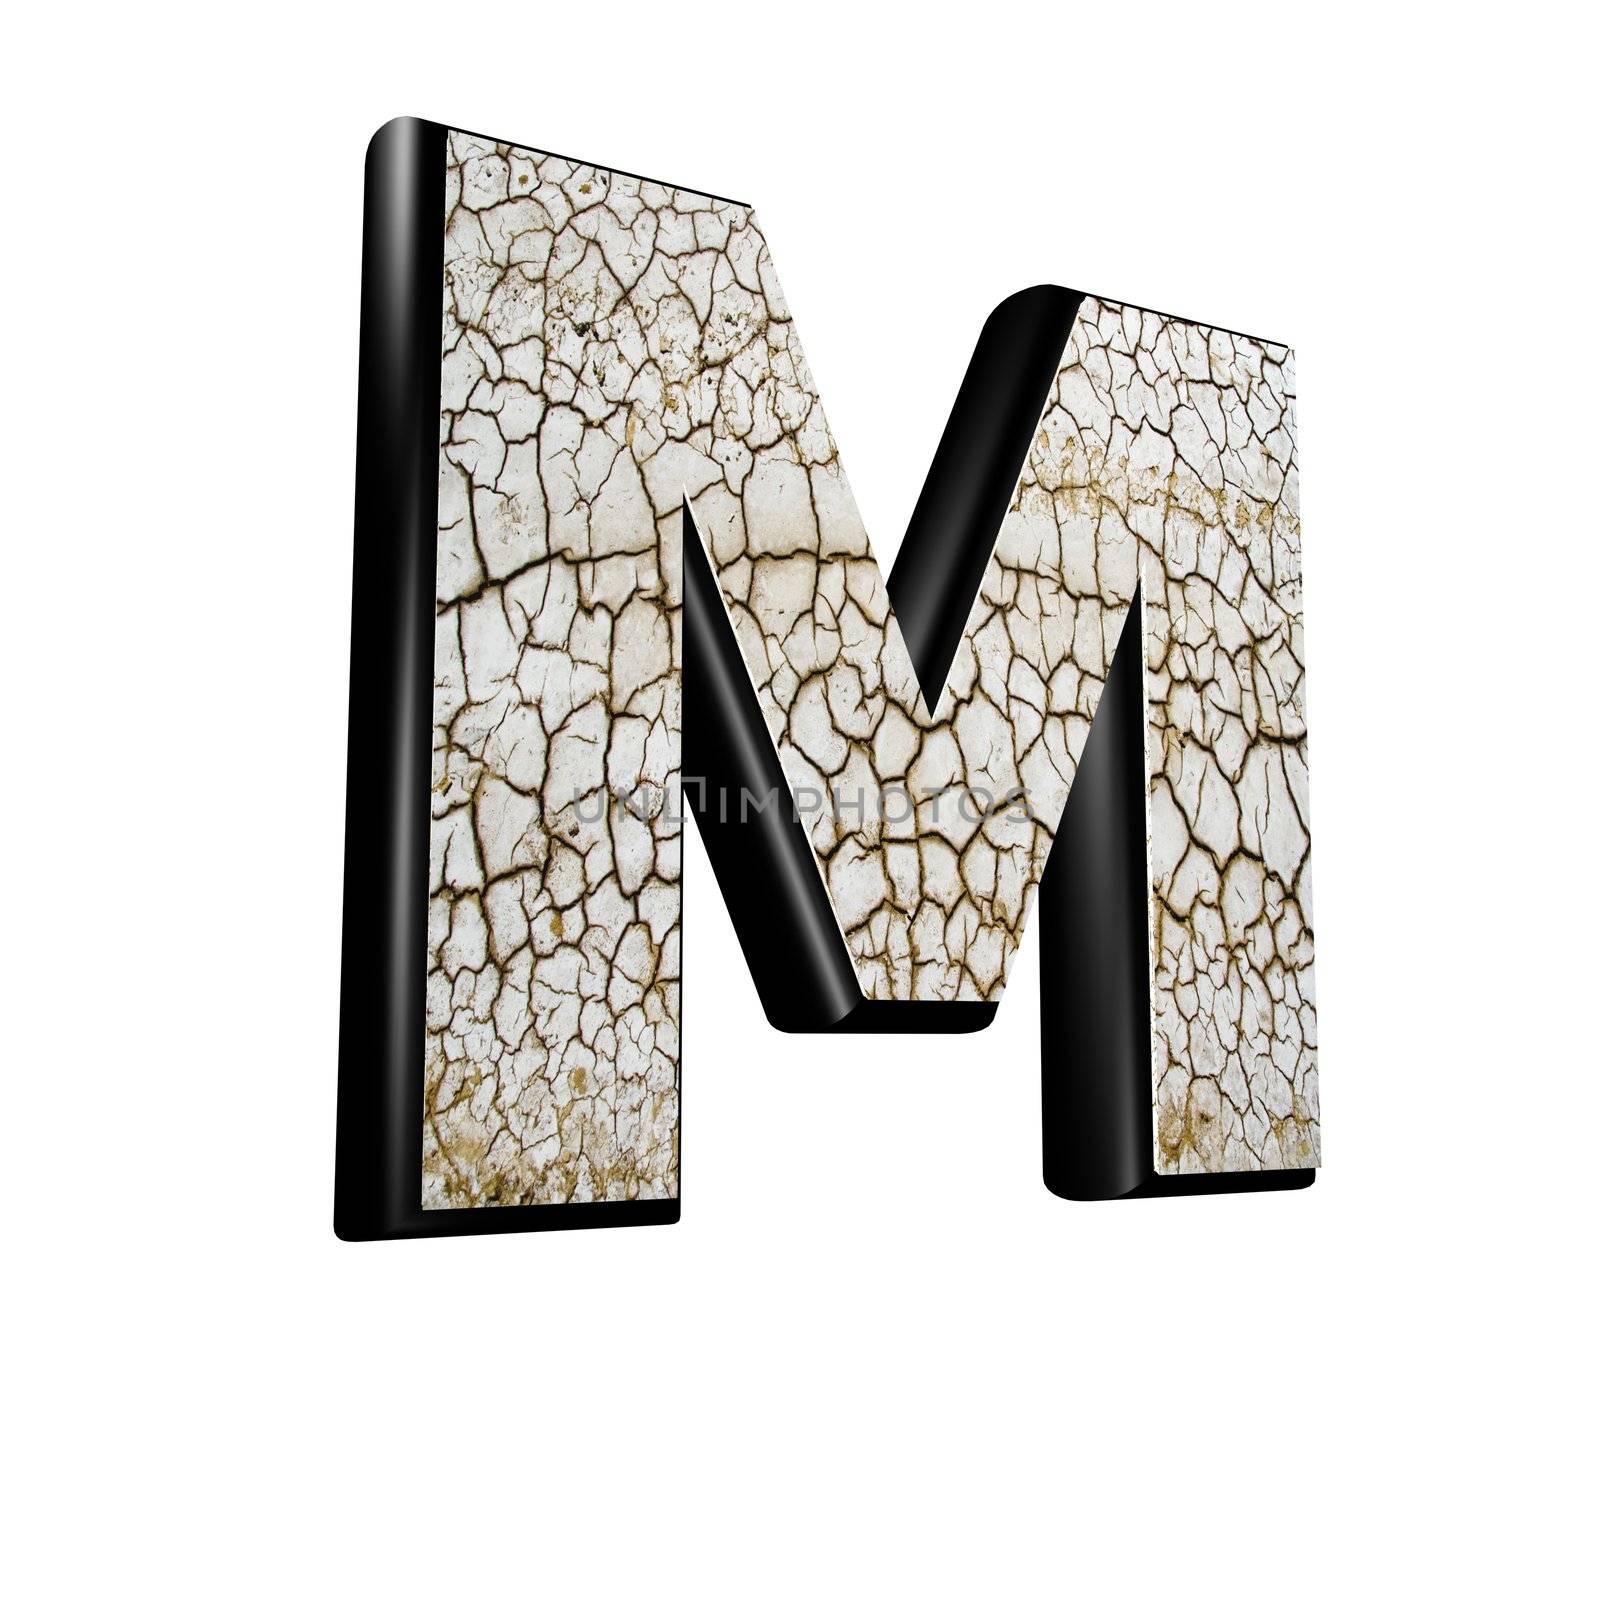 abstract 3d letter with dry ground texture - M by chrisroll